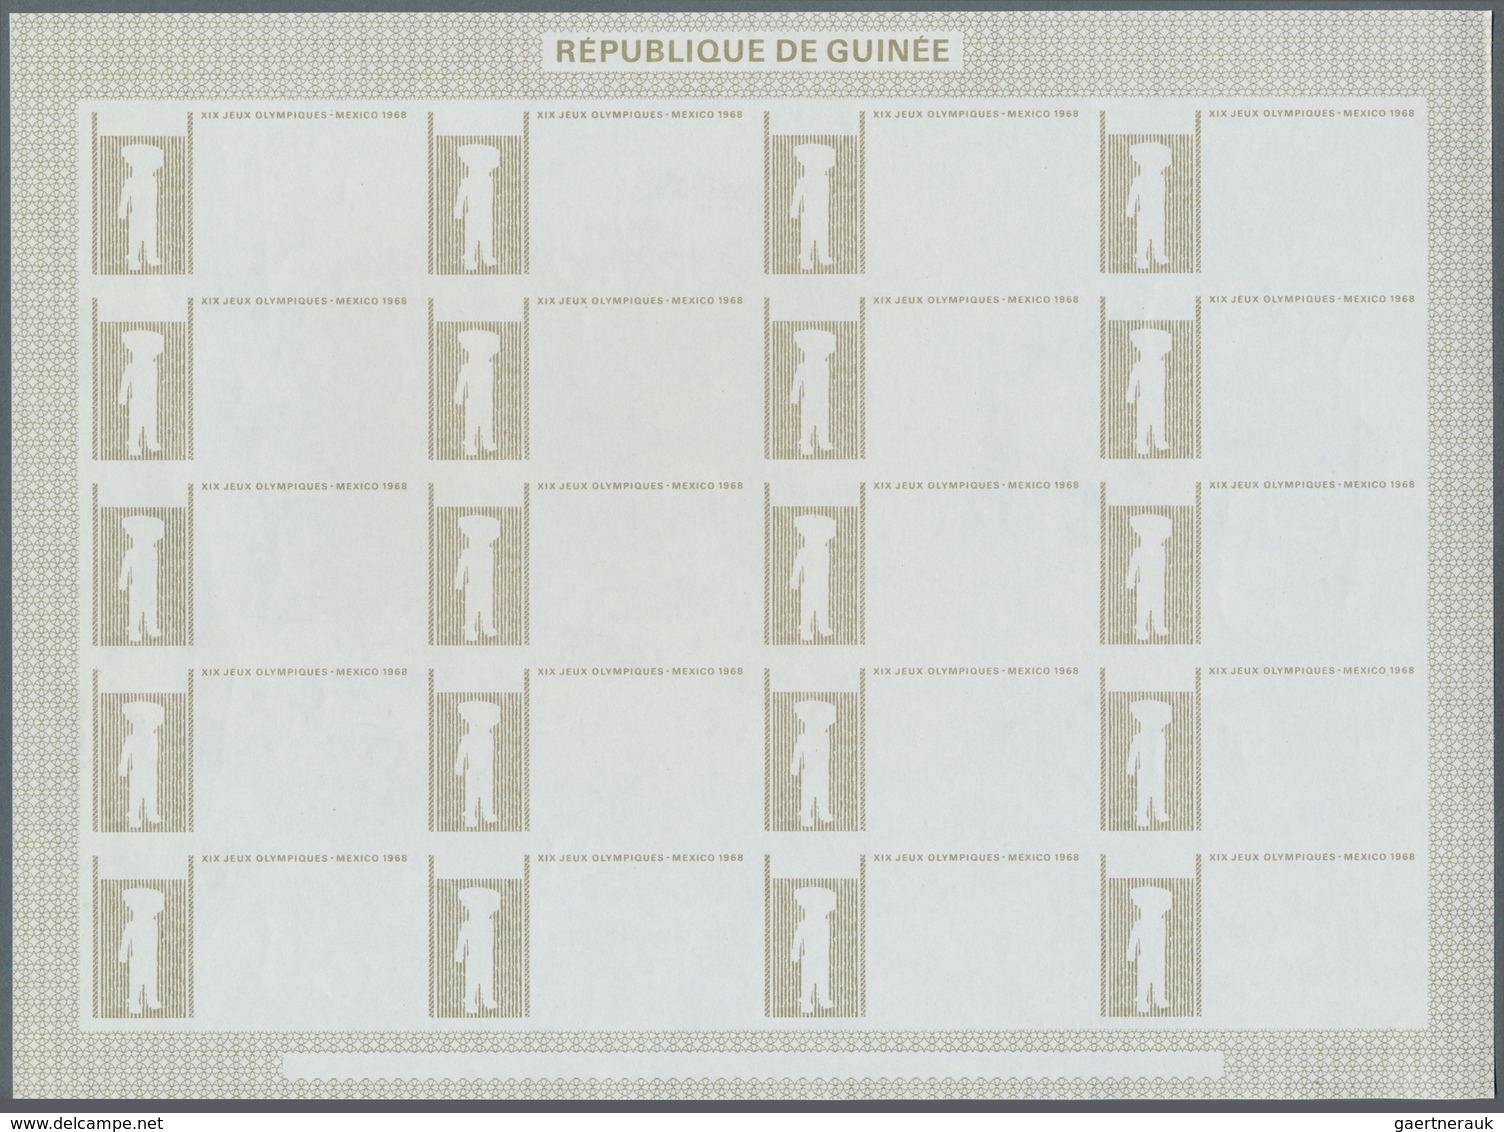 25301 Thematik: Olympische Spiele / olympic games: 1969, Guinea. Progressive proofs set of sheets for the